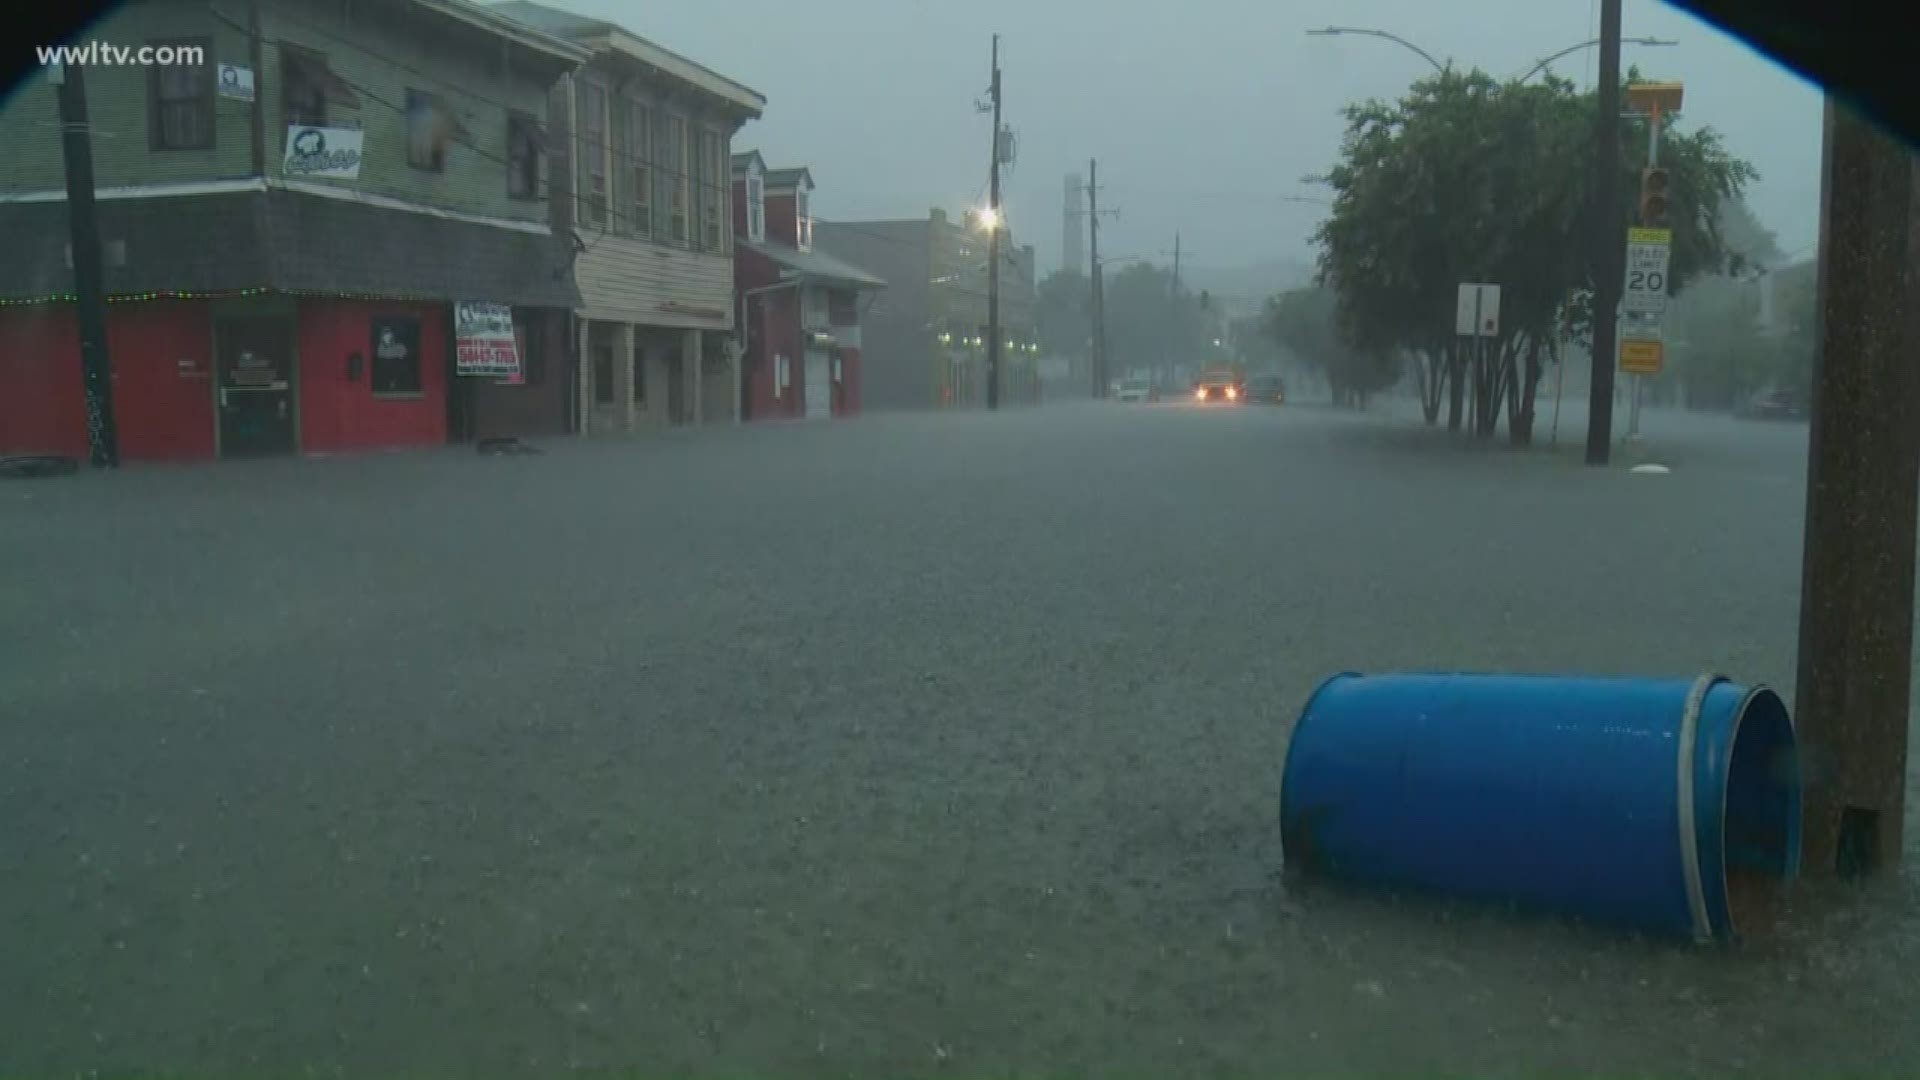 Videos show street flooding in several areas of the French Quarter and other parts of New Orleans on July 10, 2019. A tornado warning was issued as the storms passed over the area.